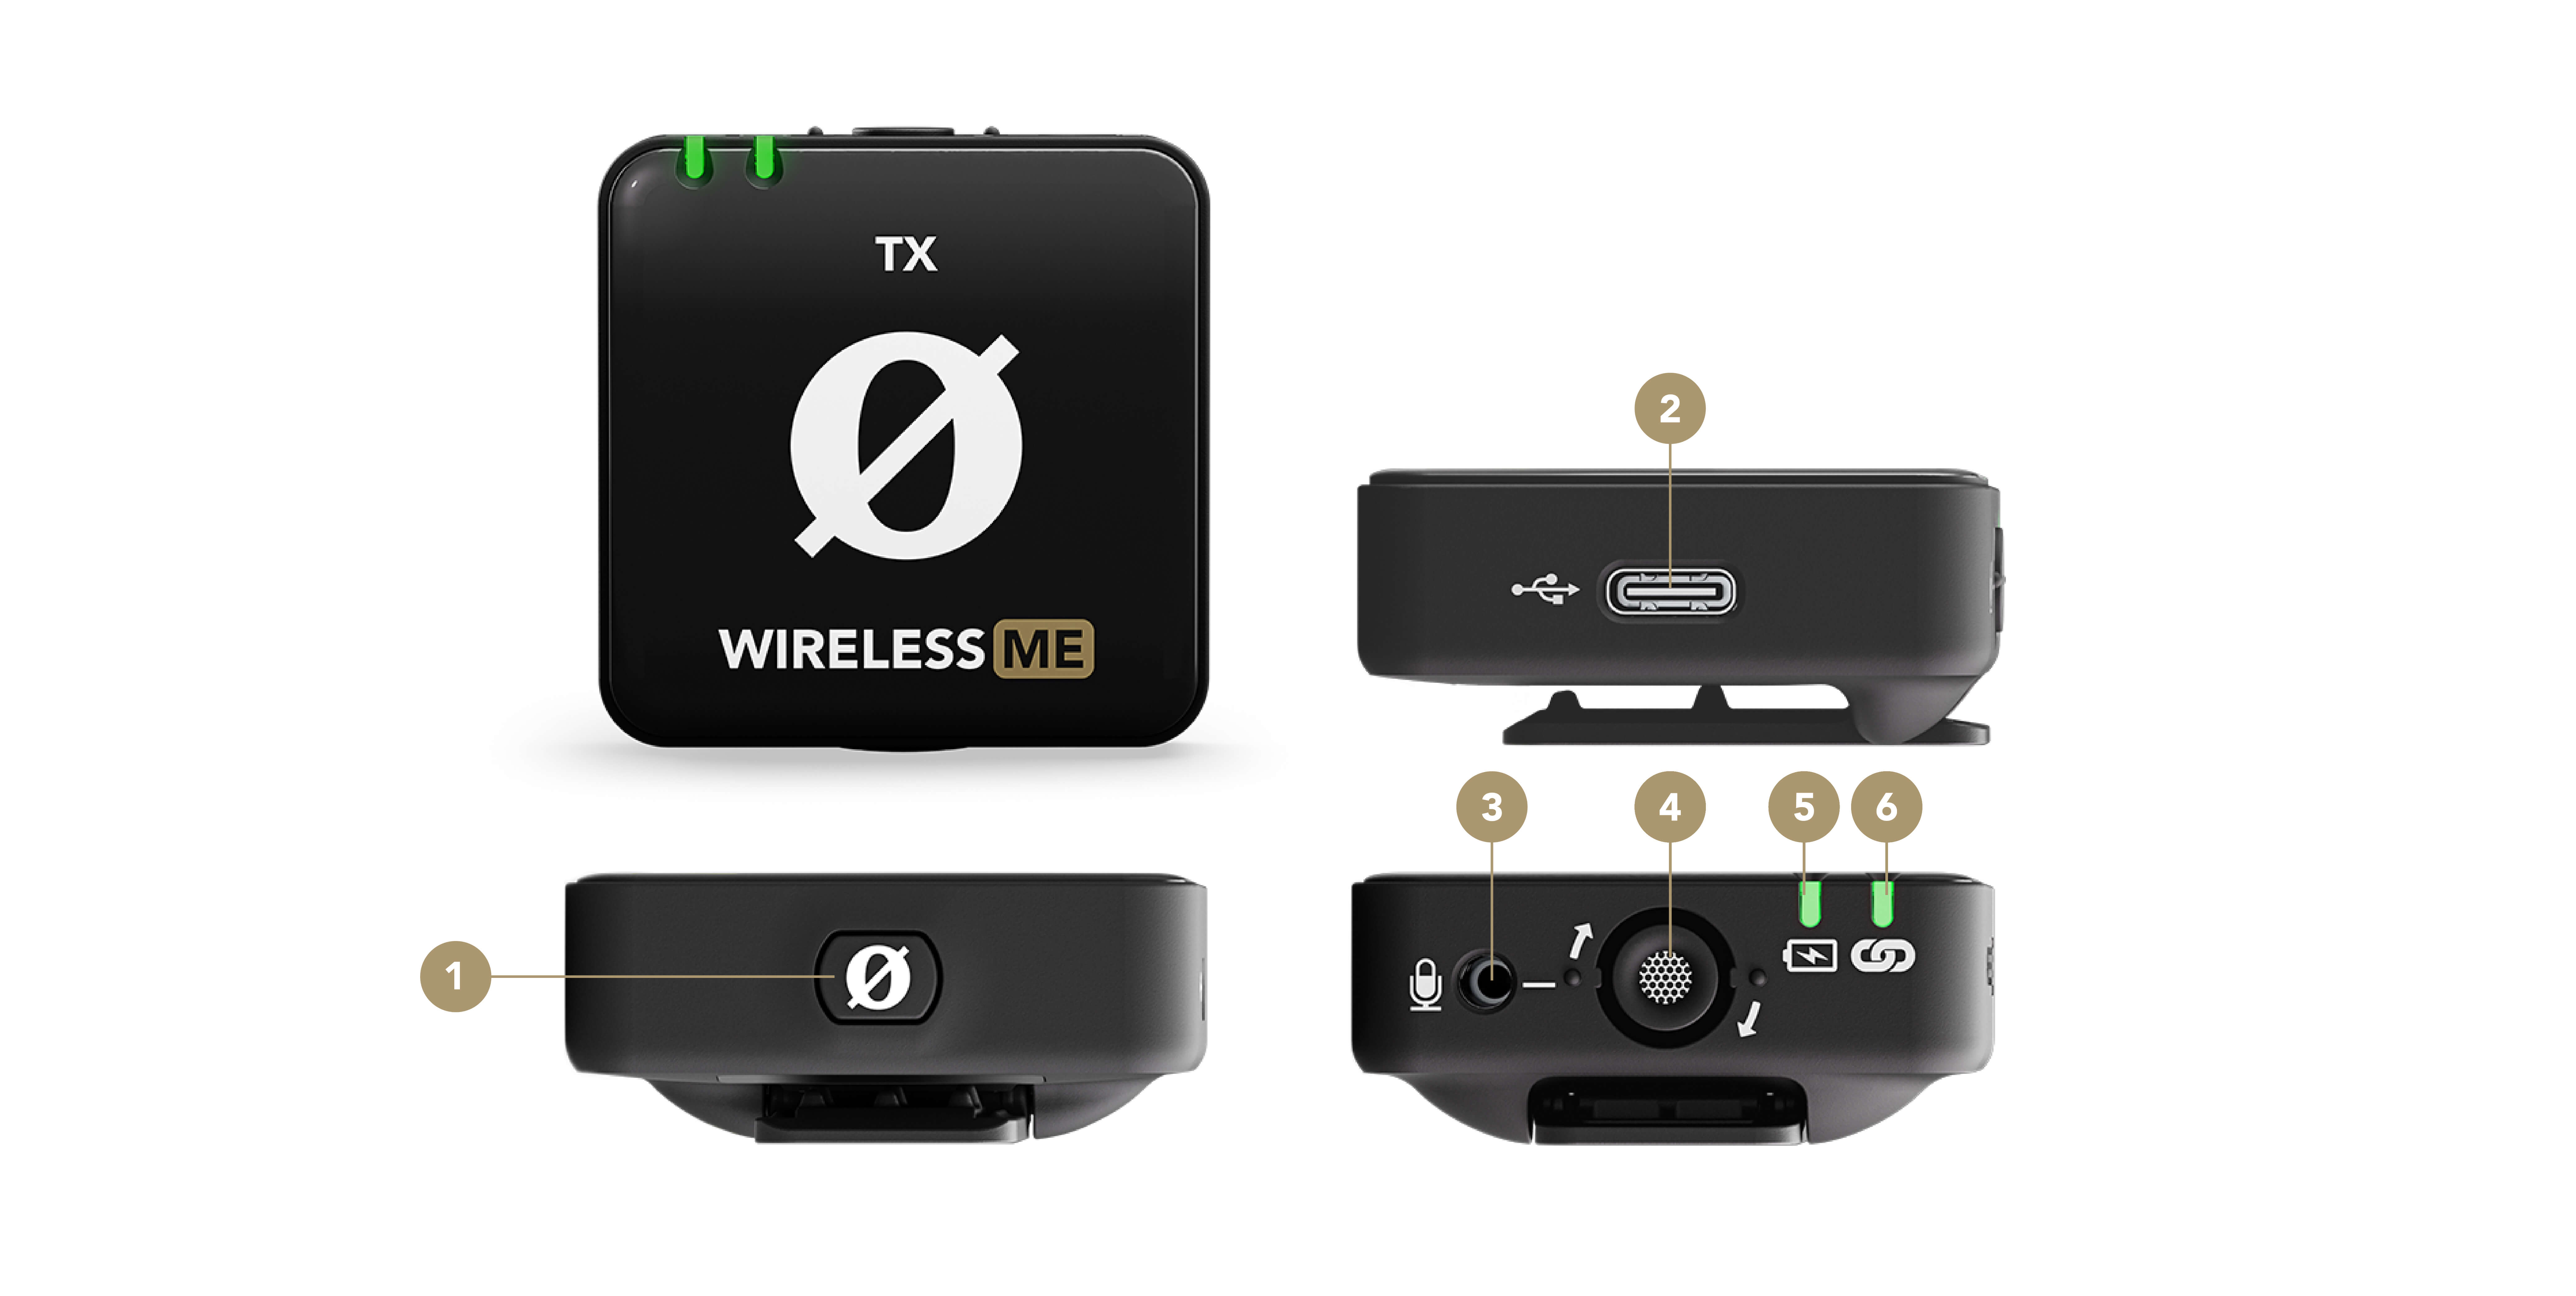 Wireless ME TX feature points